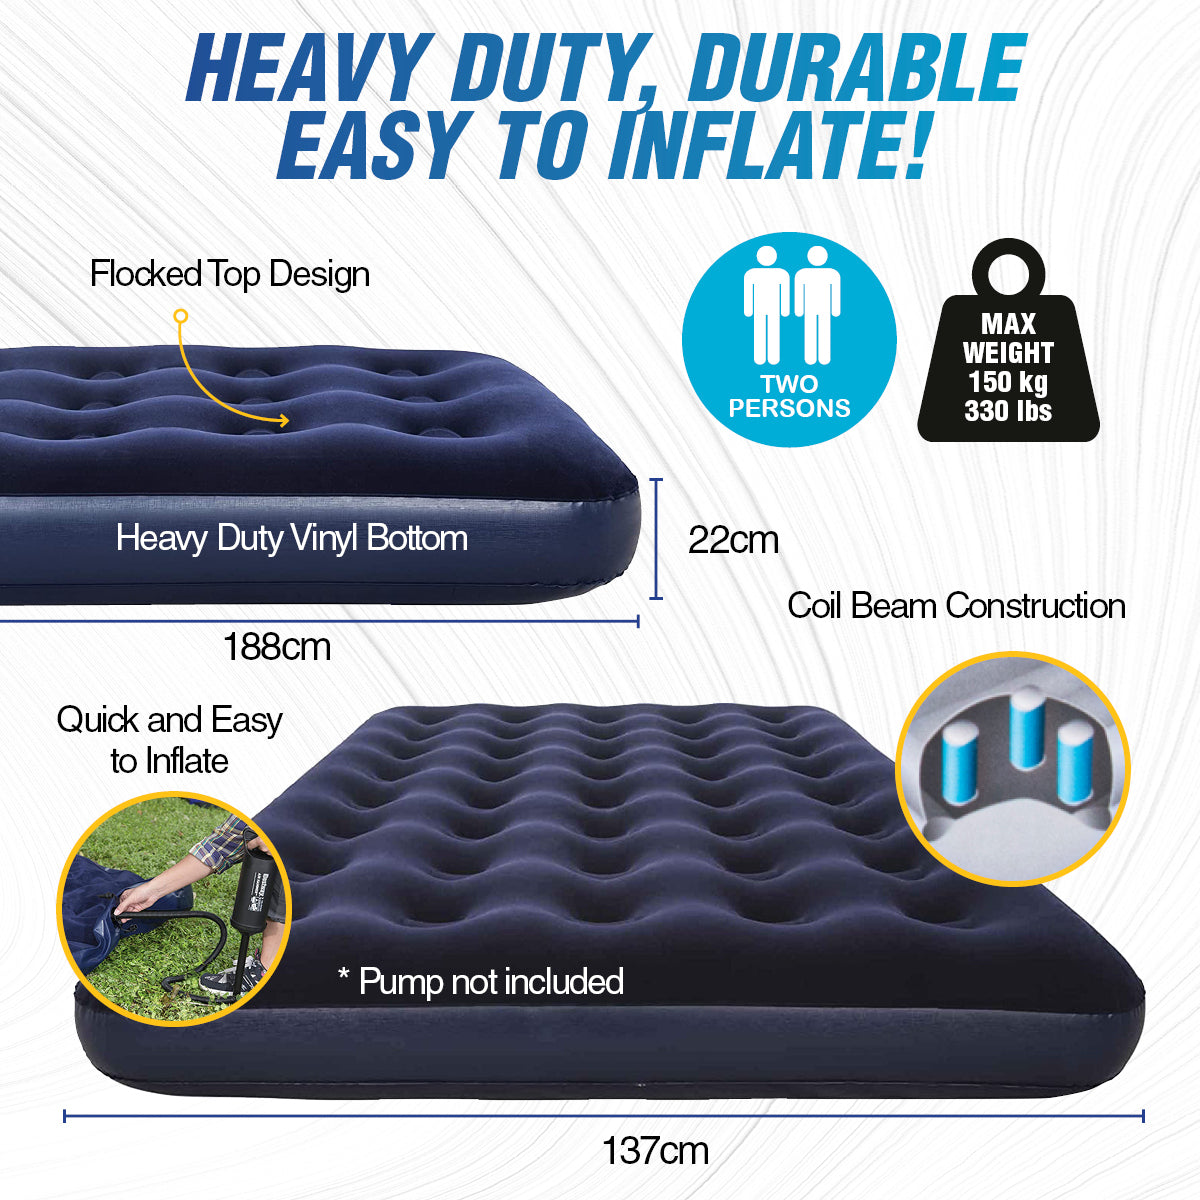 Bestway Double Inflatable Air Bed Indoor/Outdoor Heavy Duty Durable Camping - SILBERSHELL